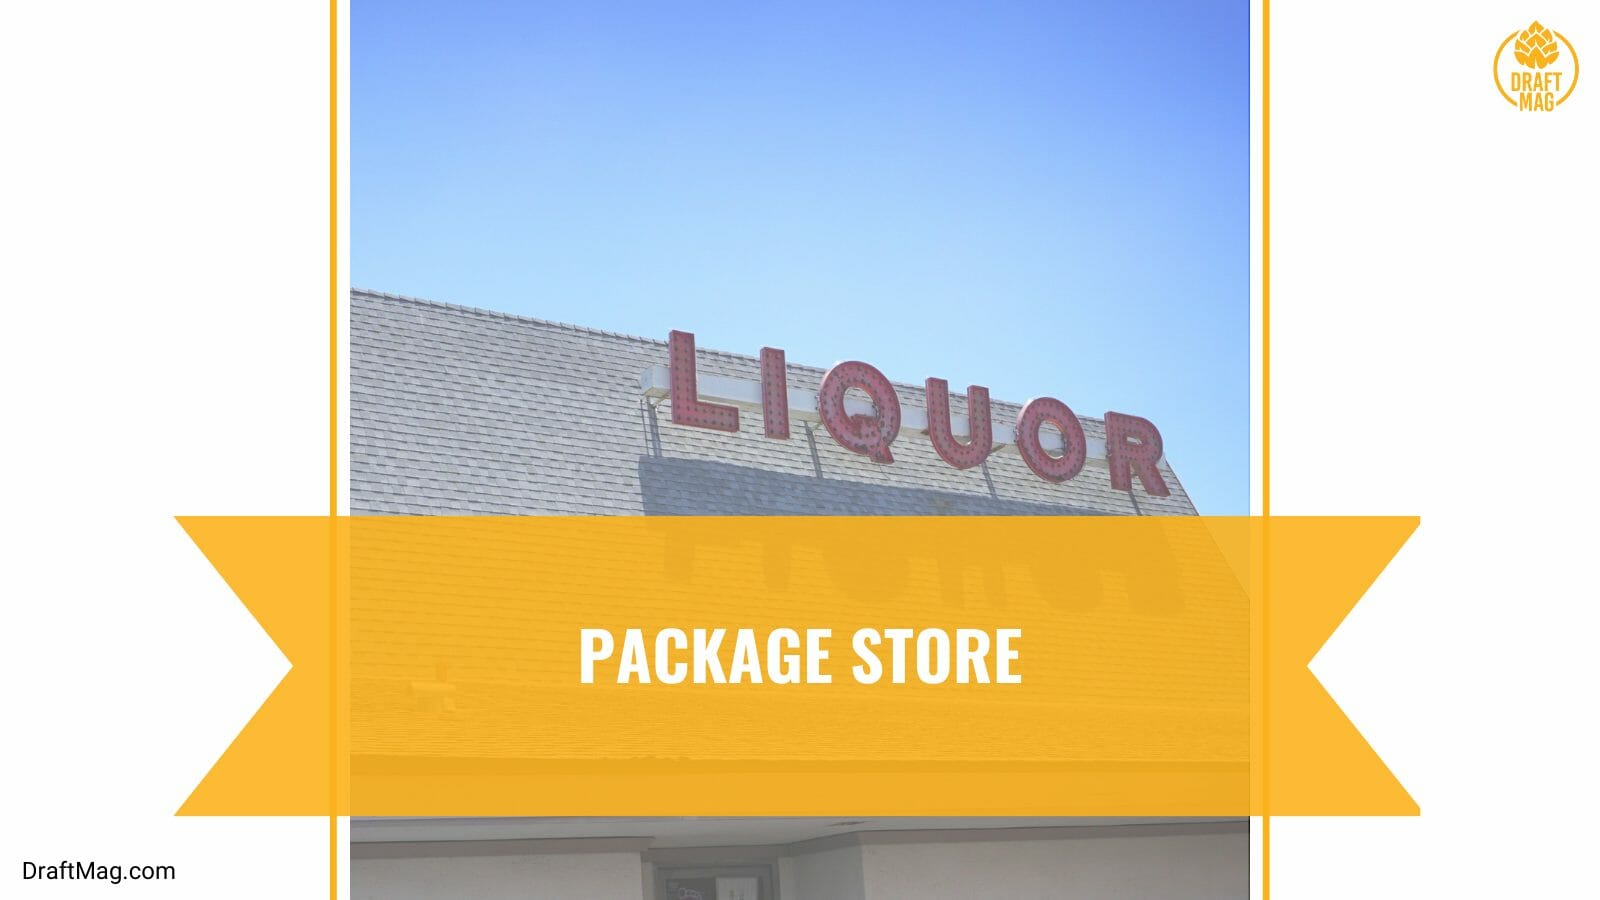 Package store